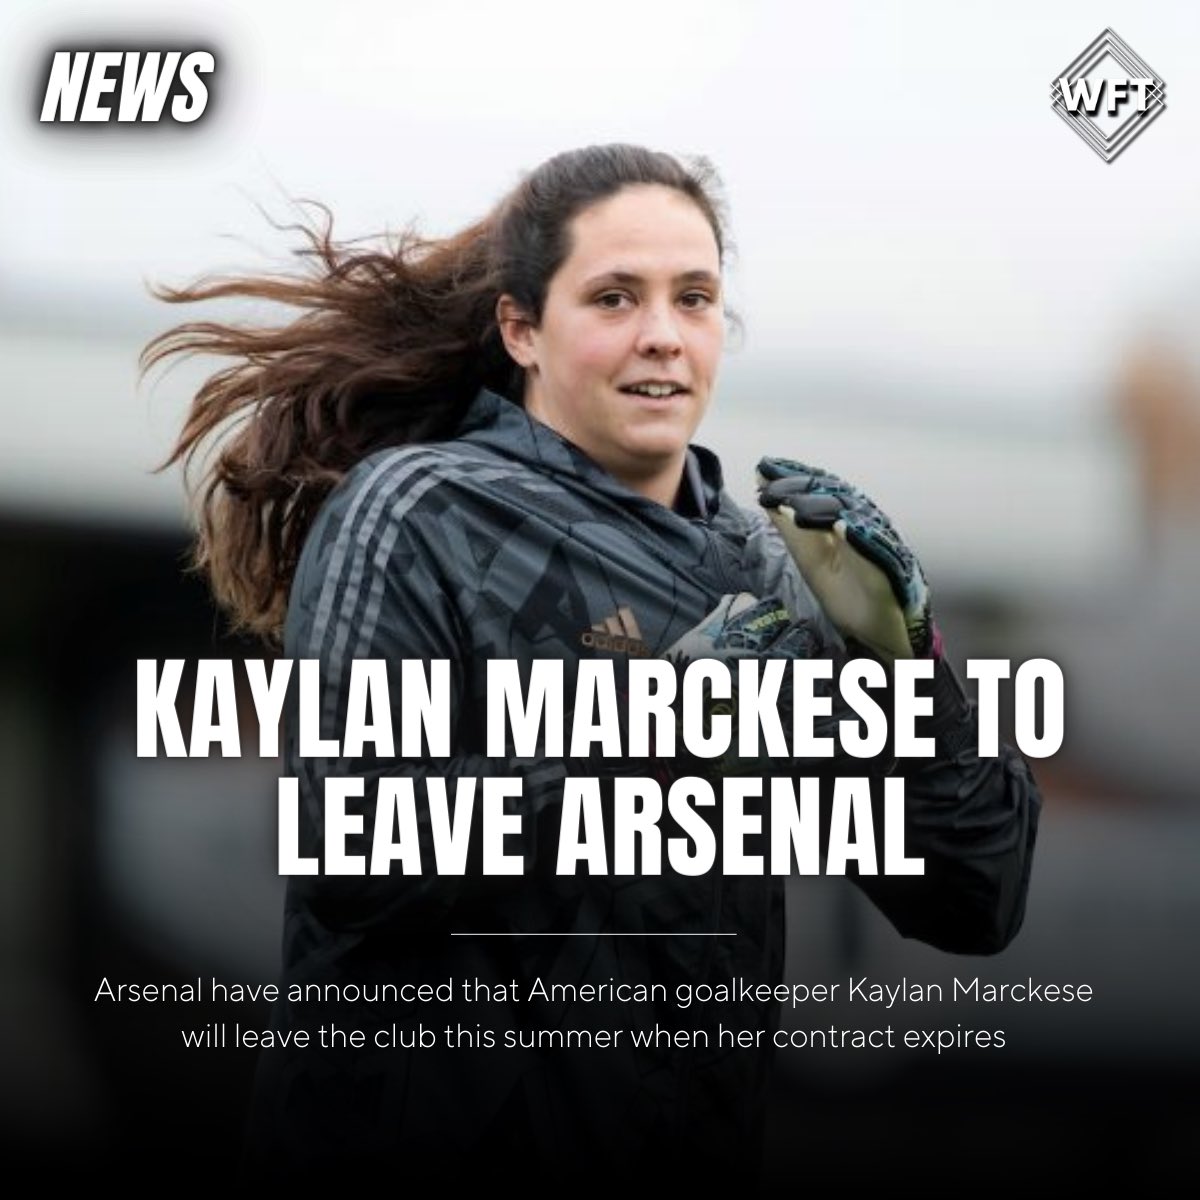 Arsenal have announced that American goalkeeper Kaylan Marckese will leave the club this summer upon the expiration of her contract. #AWFC #BarclaysWSL